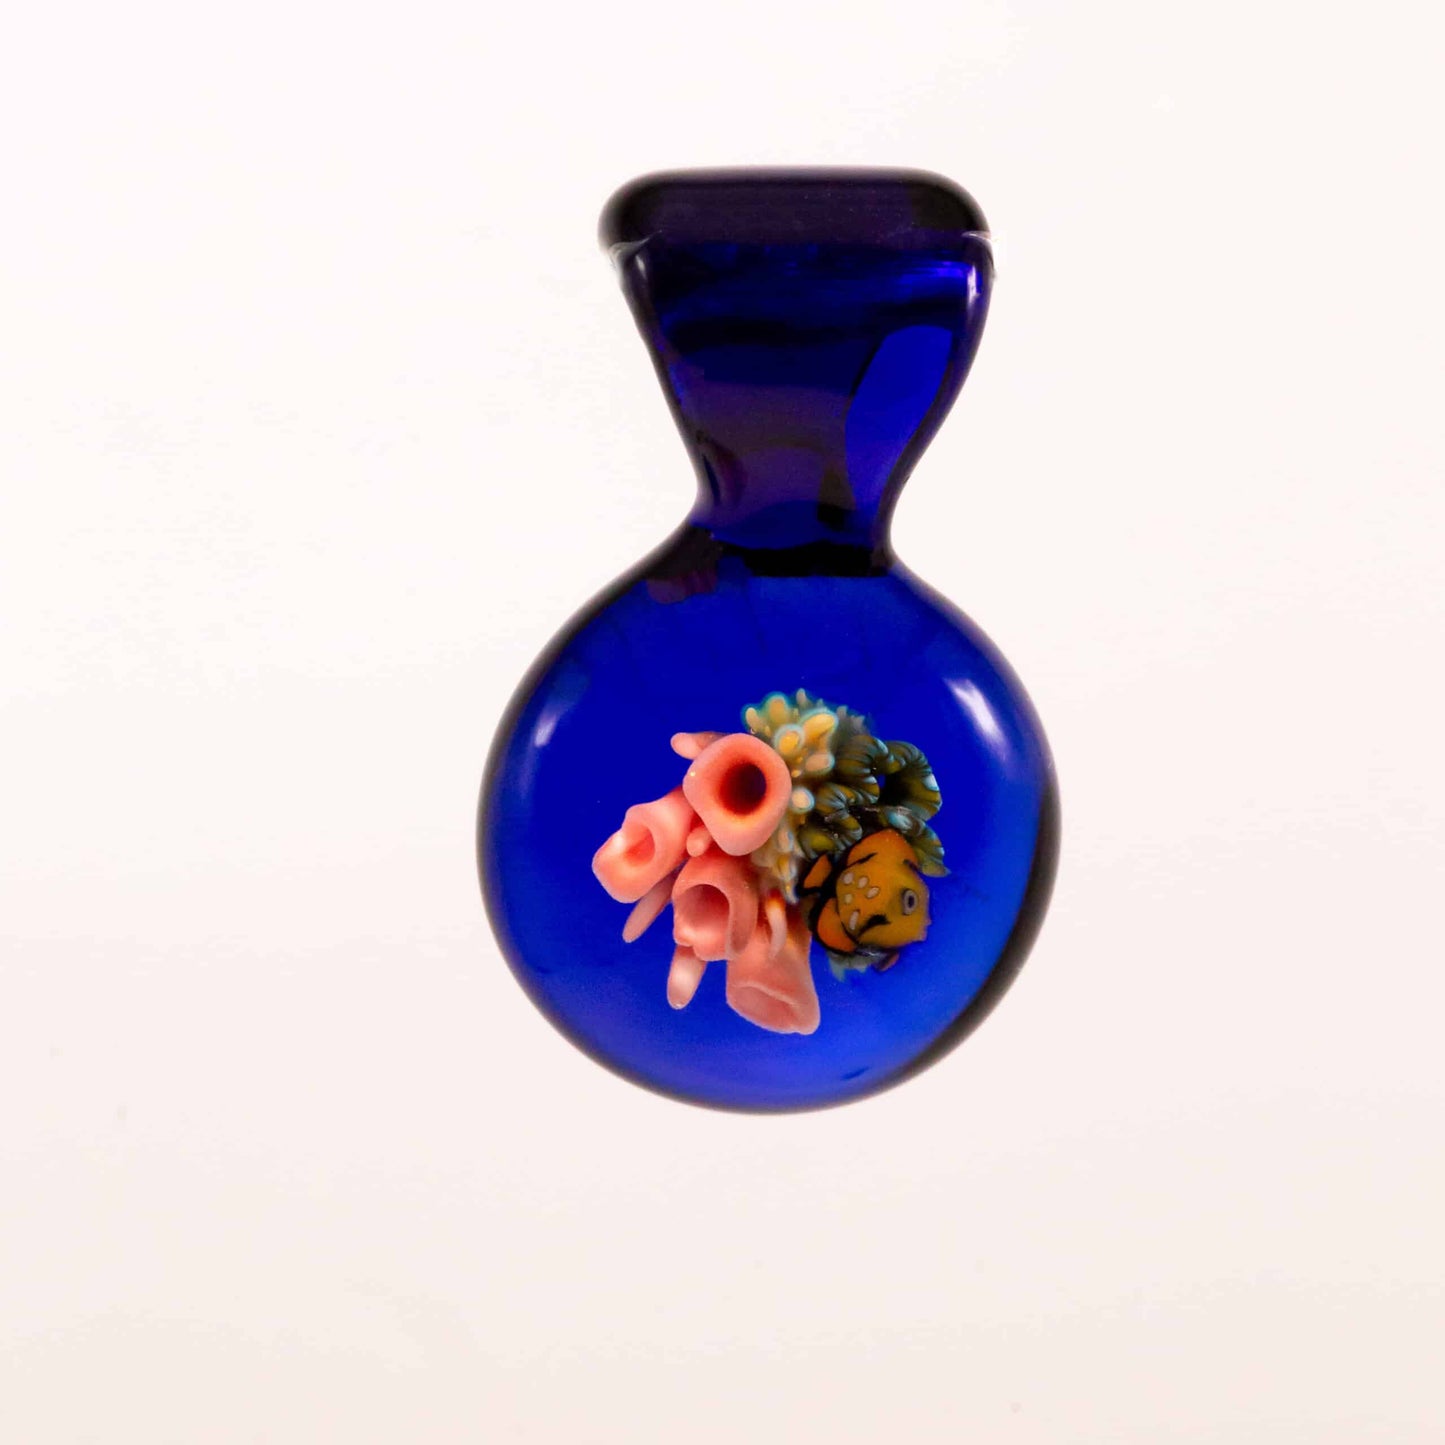 sophisticated glass pendant - Coral Reef Pendant (BLUE, ORANGE FISH) #12 BY KIMMO